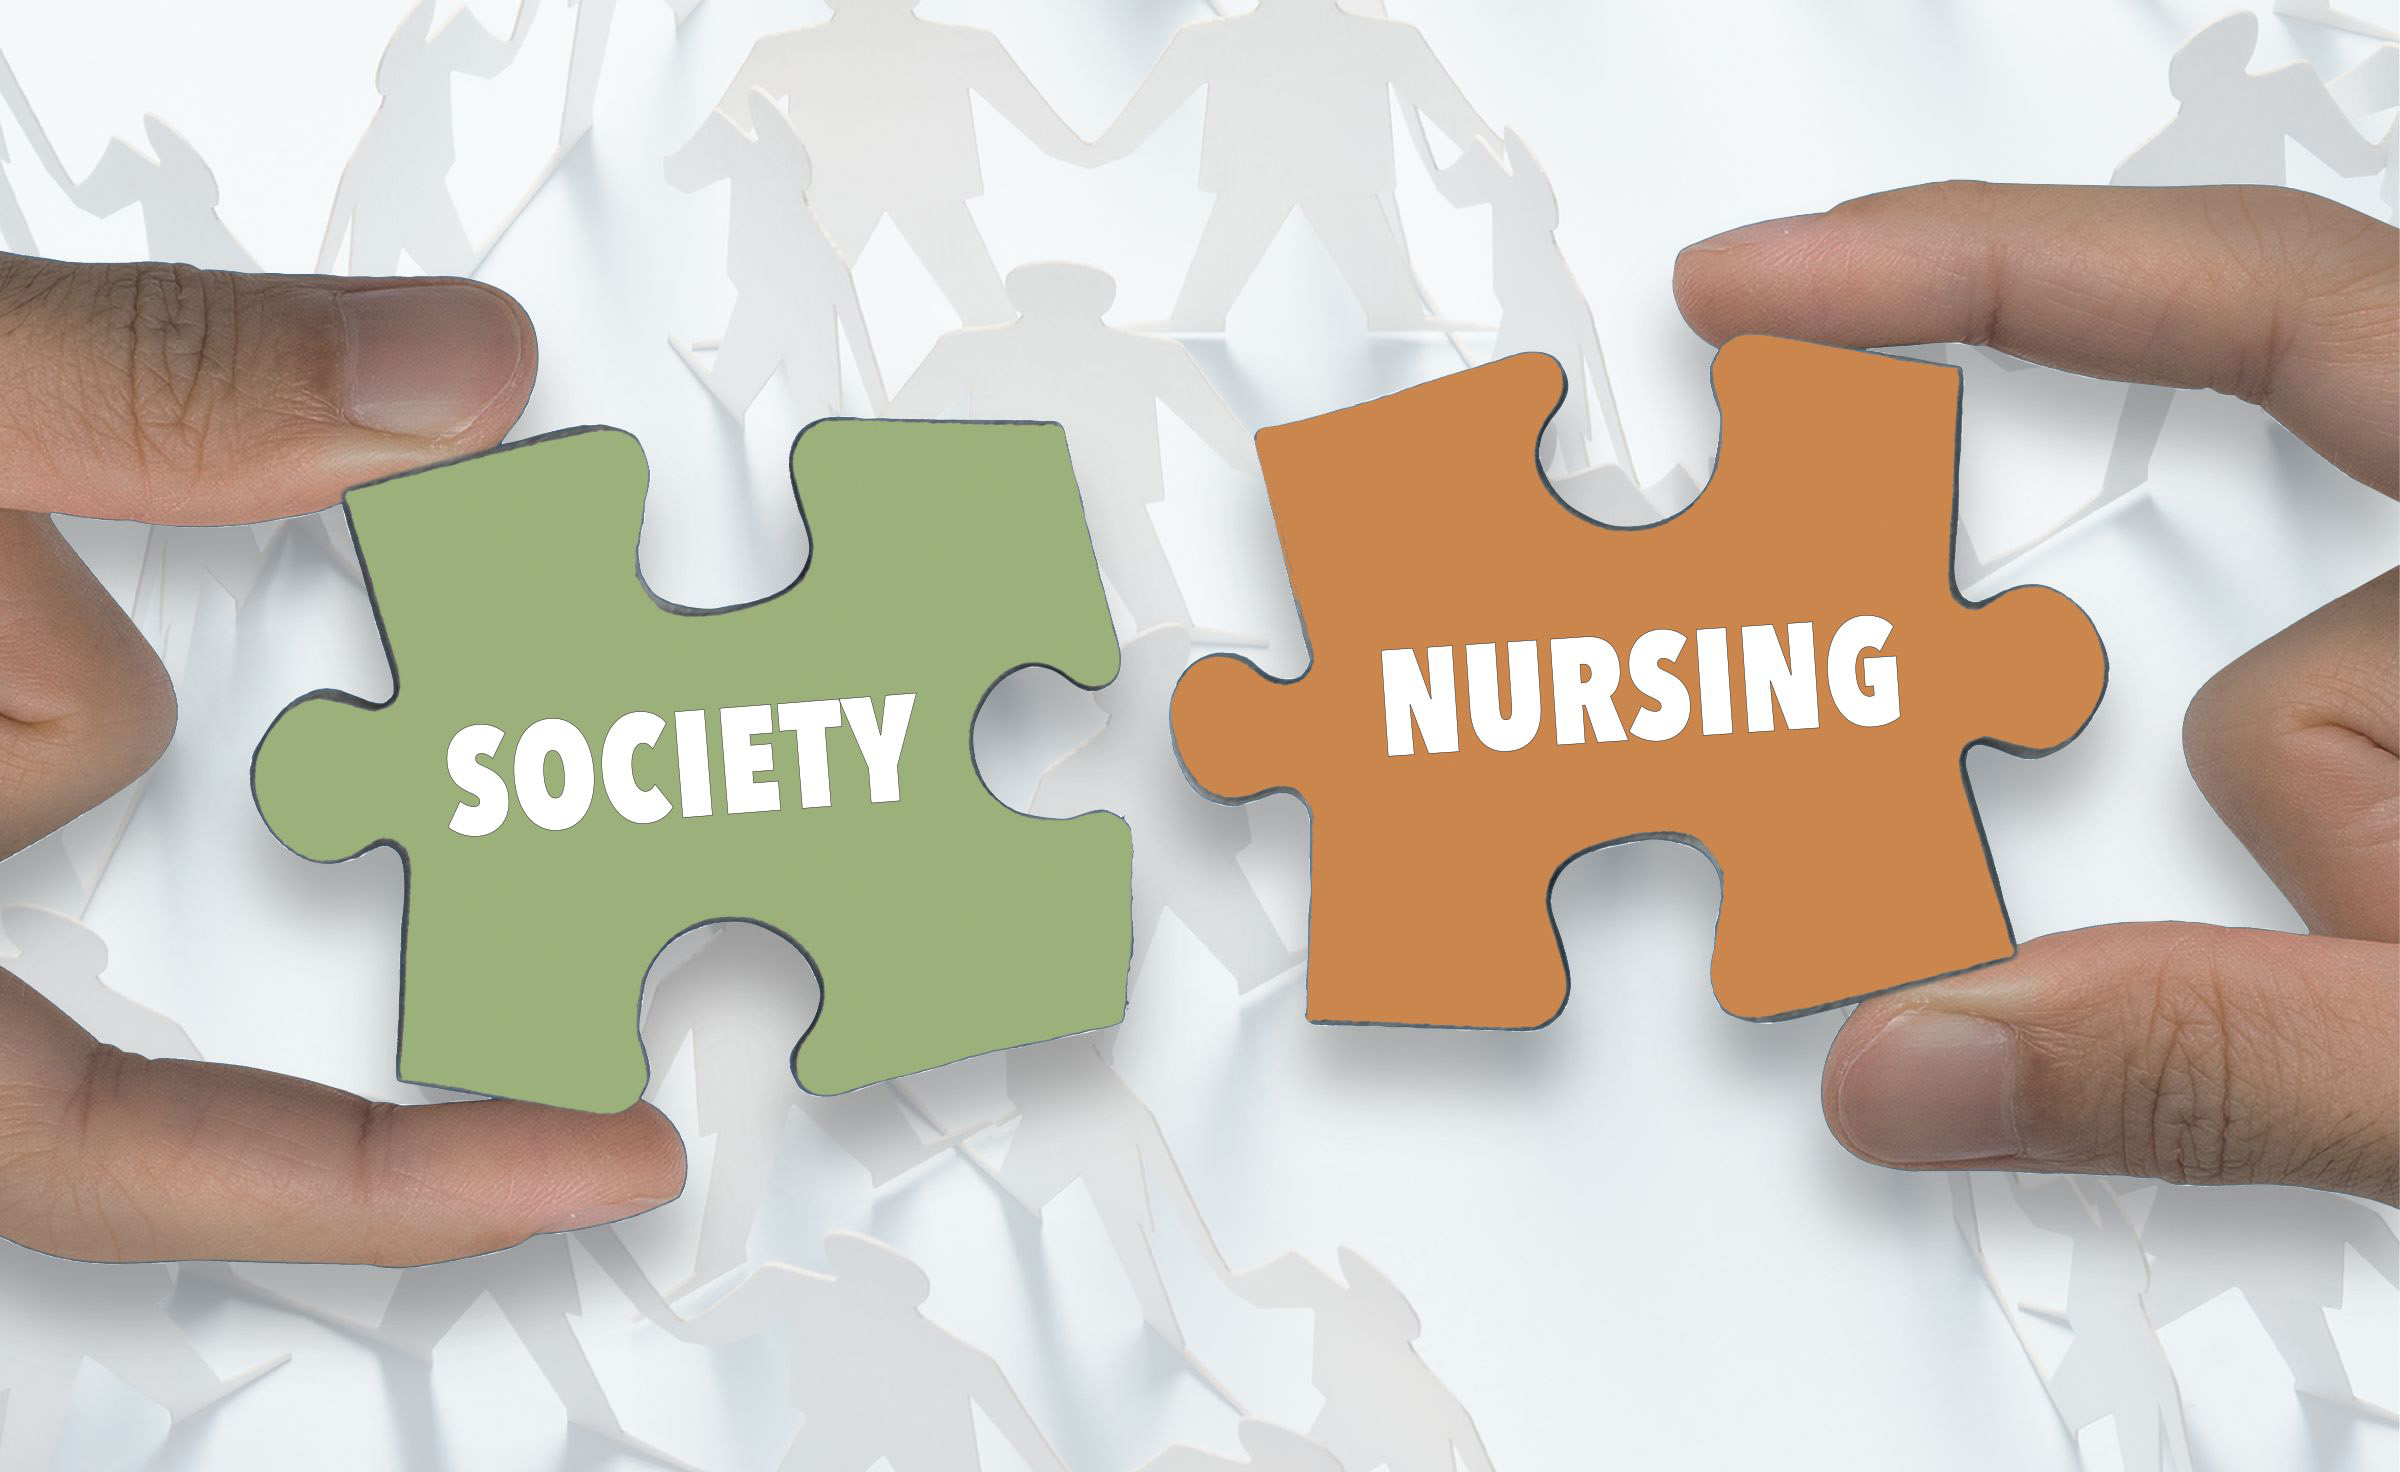 Re-imagining nursing's social contract with the public